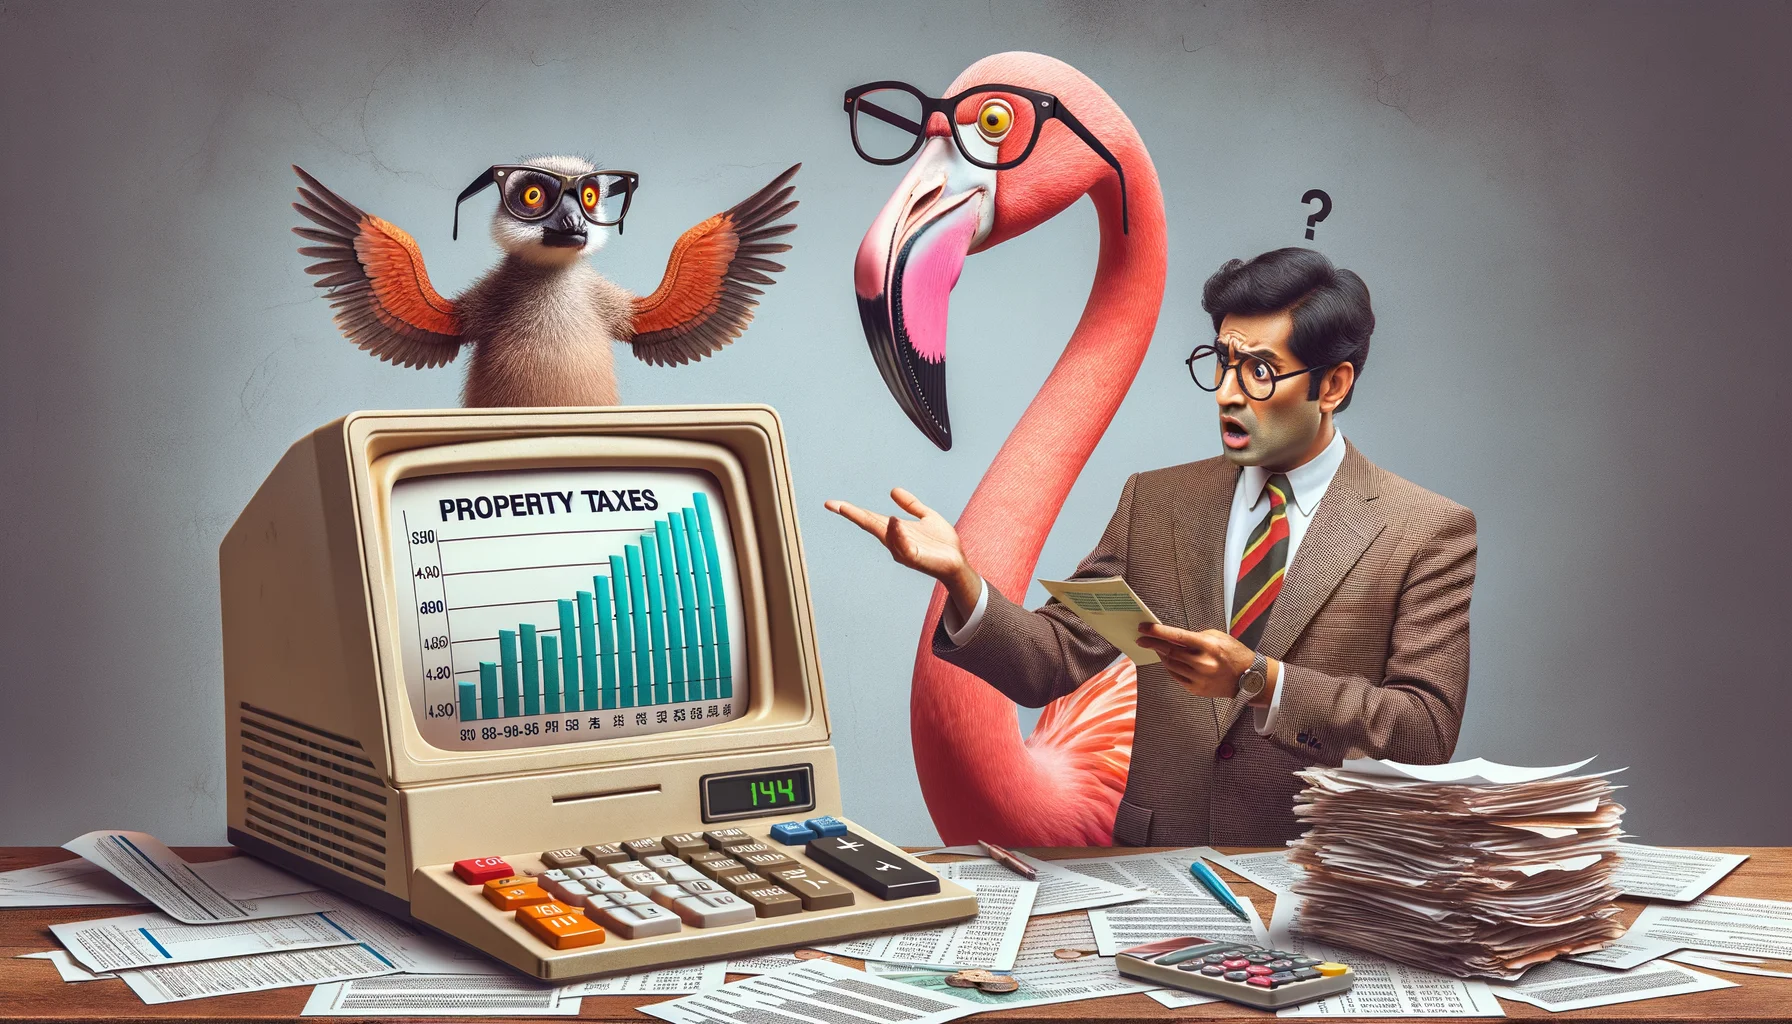 Please create a humorous and realistic image illustrating the concept of property taxes. Imagine a puzzled flamingo, wearing reading glasses on its beak, gazing at a chunky, ancient-looking computer screen displaying a bar chart of property taxes. Standing next to the flamingo is a South Asian male tax consultant trying to explain the concept with a oversized calculator and a mound of paper filled with numbers and tax laws. Add to the comedic element, let's have a kangaroo wearing a suit in the background looking panicked while checking its wallet.